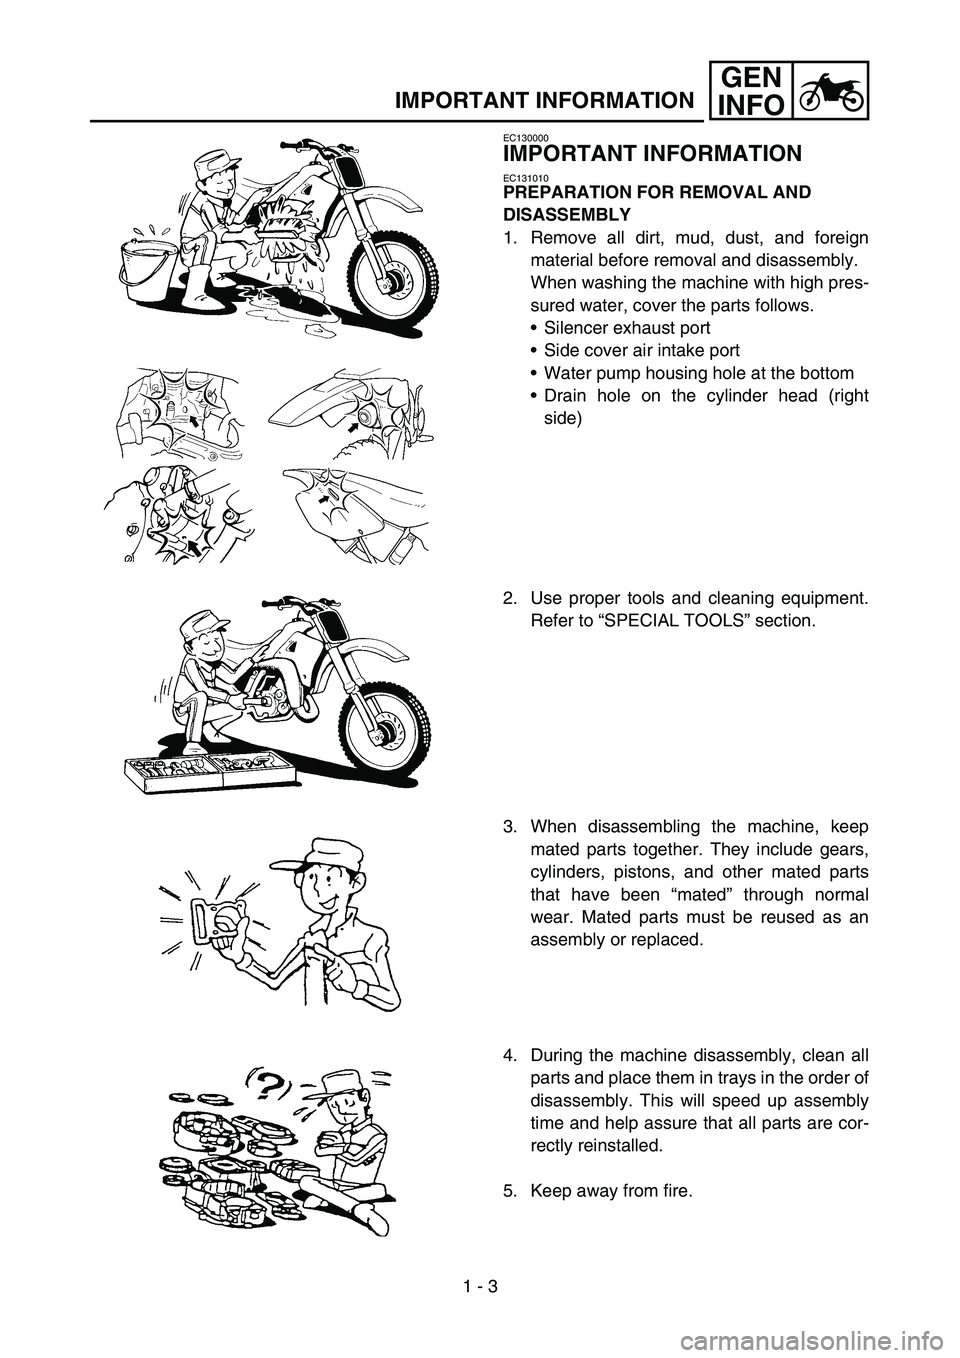 YAMAHA YZ250F 2007 Owners Manual 1 - 3
GEN
INFO
IMPORTANT INFORMATION
EC130000
IMPORTANT INFORMATION
EC131010
PREPARATION FOR REMOVAL AND 
DISASSEMBLY
1. Remove all dirt, mud, dust, and foreign
material before removal and disassembly